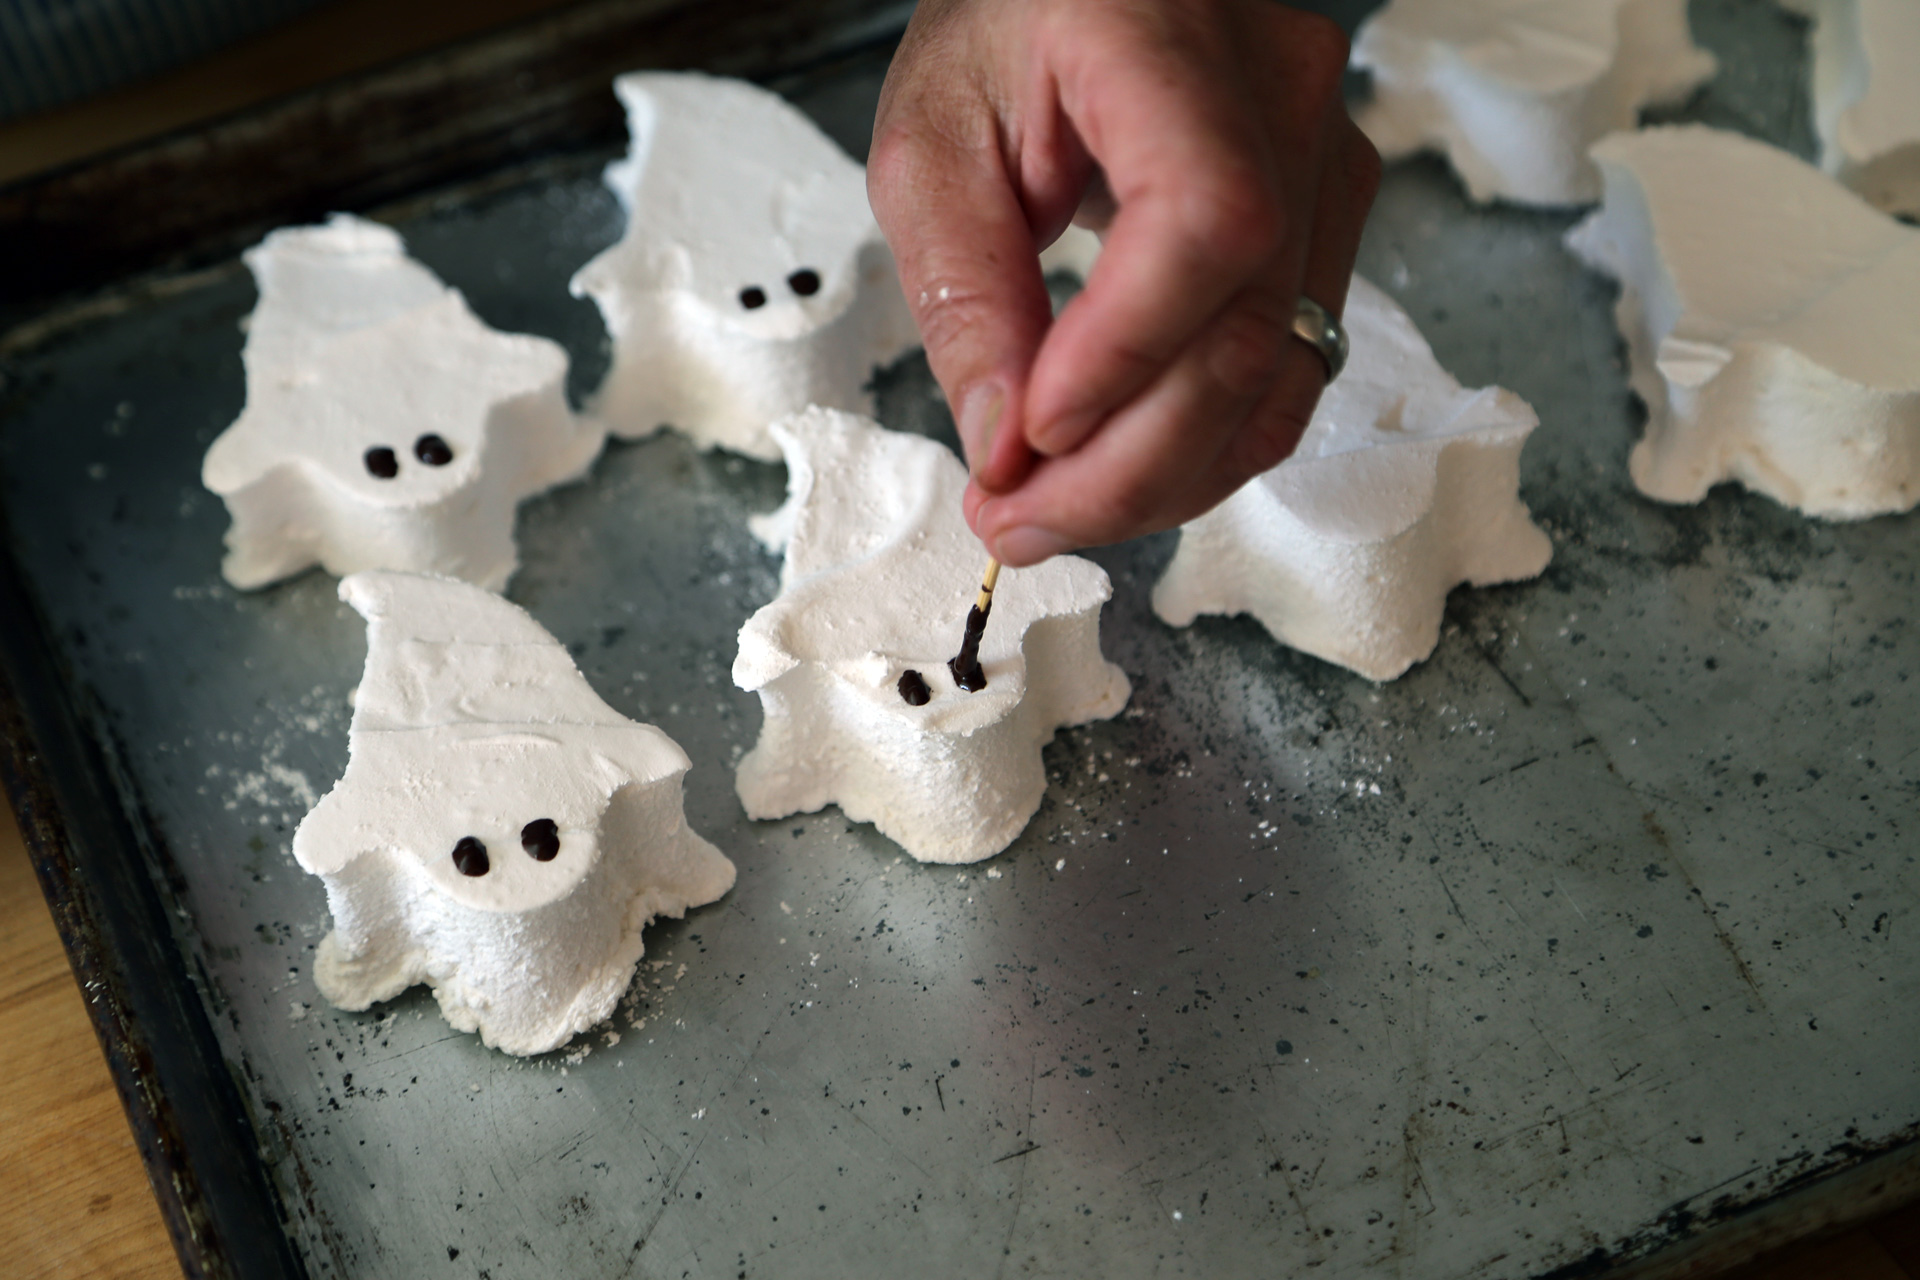 Melt the chocolate chips in a bowl in the microwave at 30-second bursts, stirring each time, until smooth and melted. Use a toothpick to draw spooky eyes and a scary mouth onto the marshmallow ghosts.